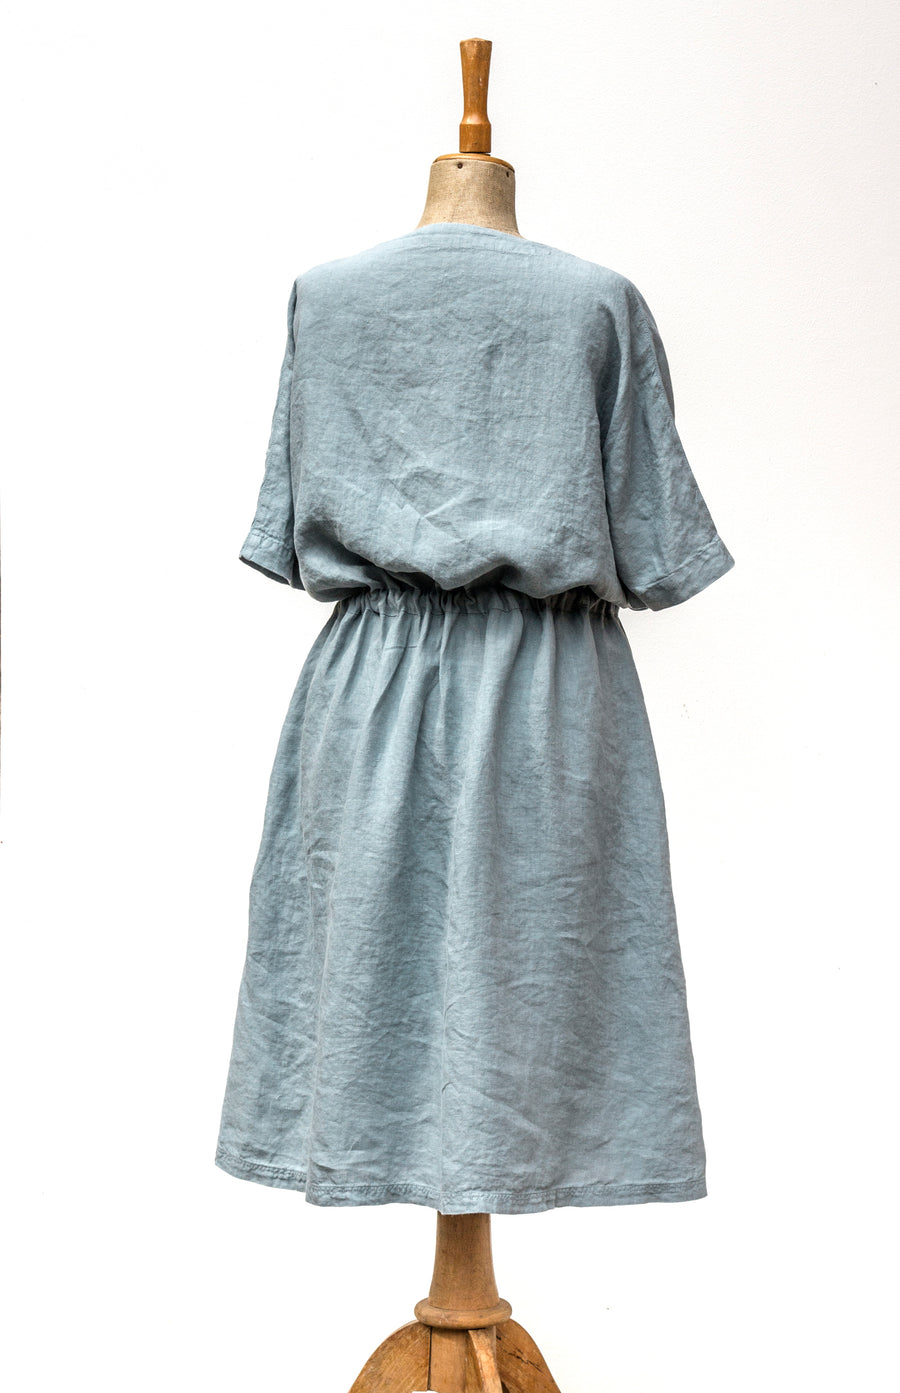 Extra soft button-up dress in Stone Blue shade